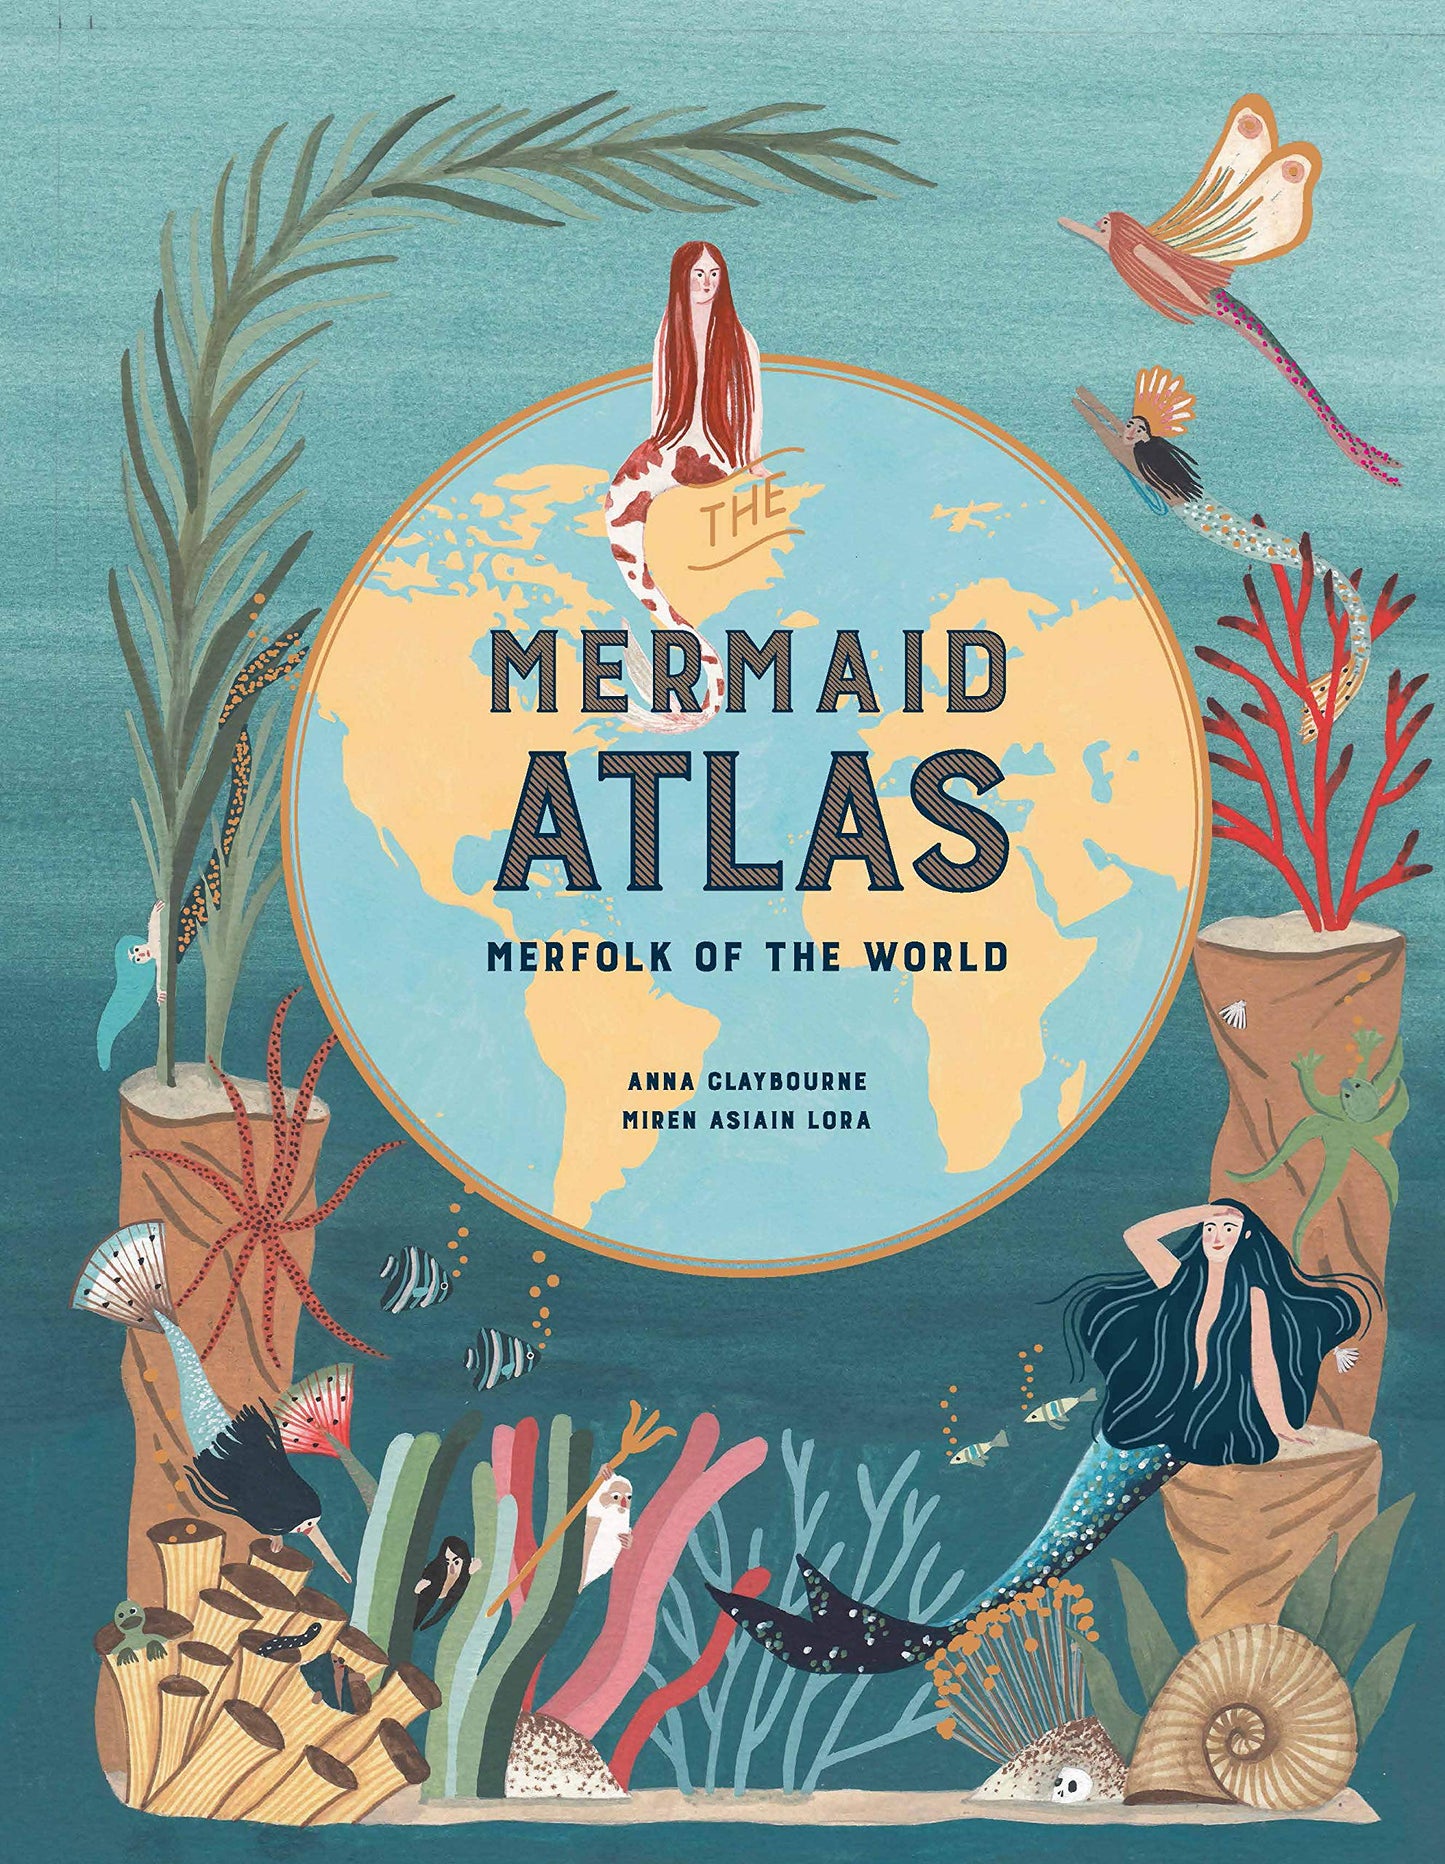 The Mermaid Atlas by Anna Claybourne Illustrations by Miren Asiain Lora